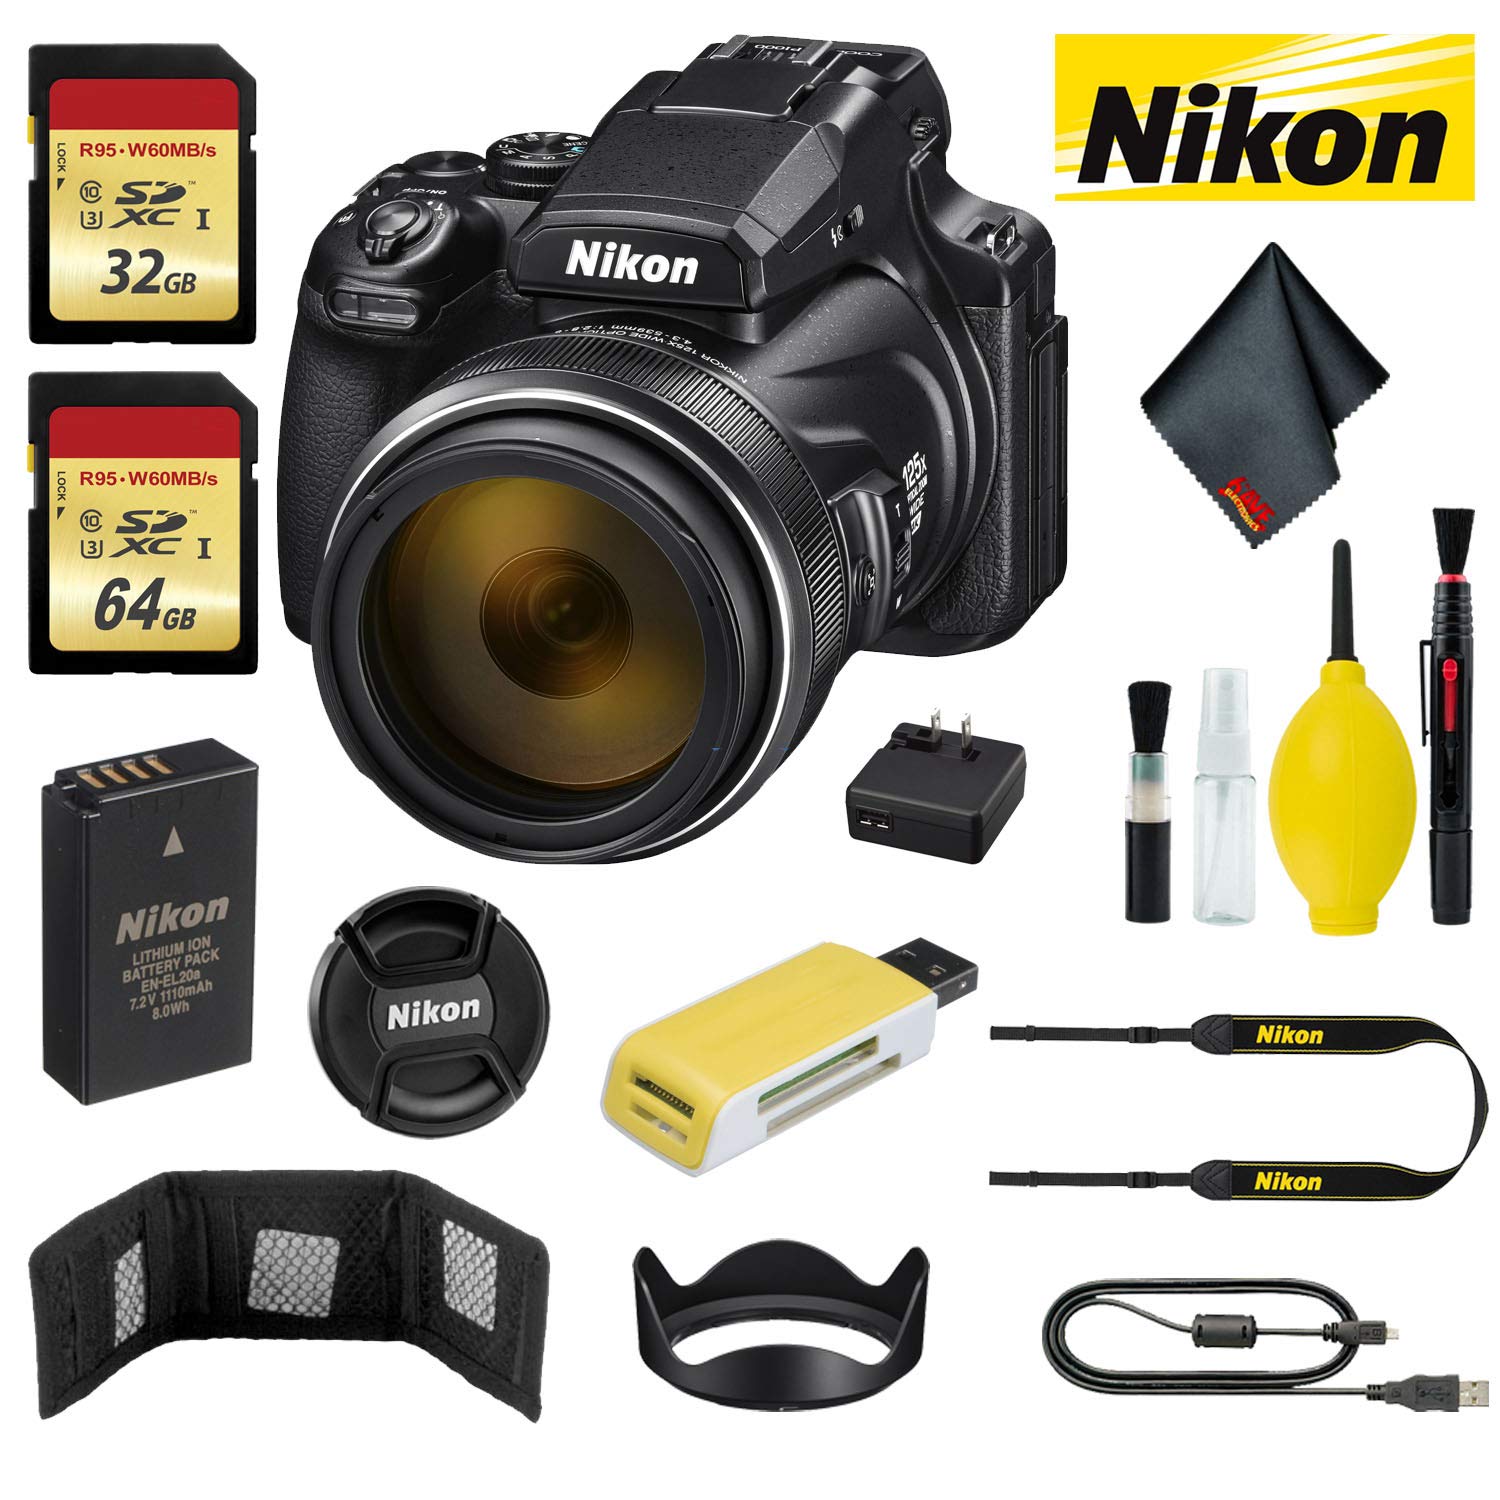 Nikon COOLPIX P1000 Digital Camera with 32GB + 64GB Memory Card, Memory Card Wallet, USB Card Reader and Cleaning Kit